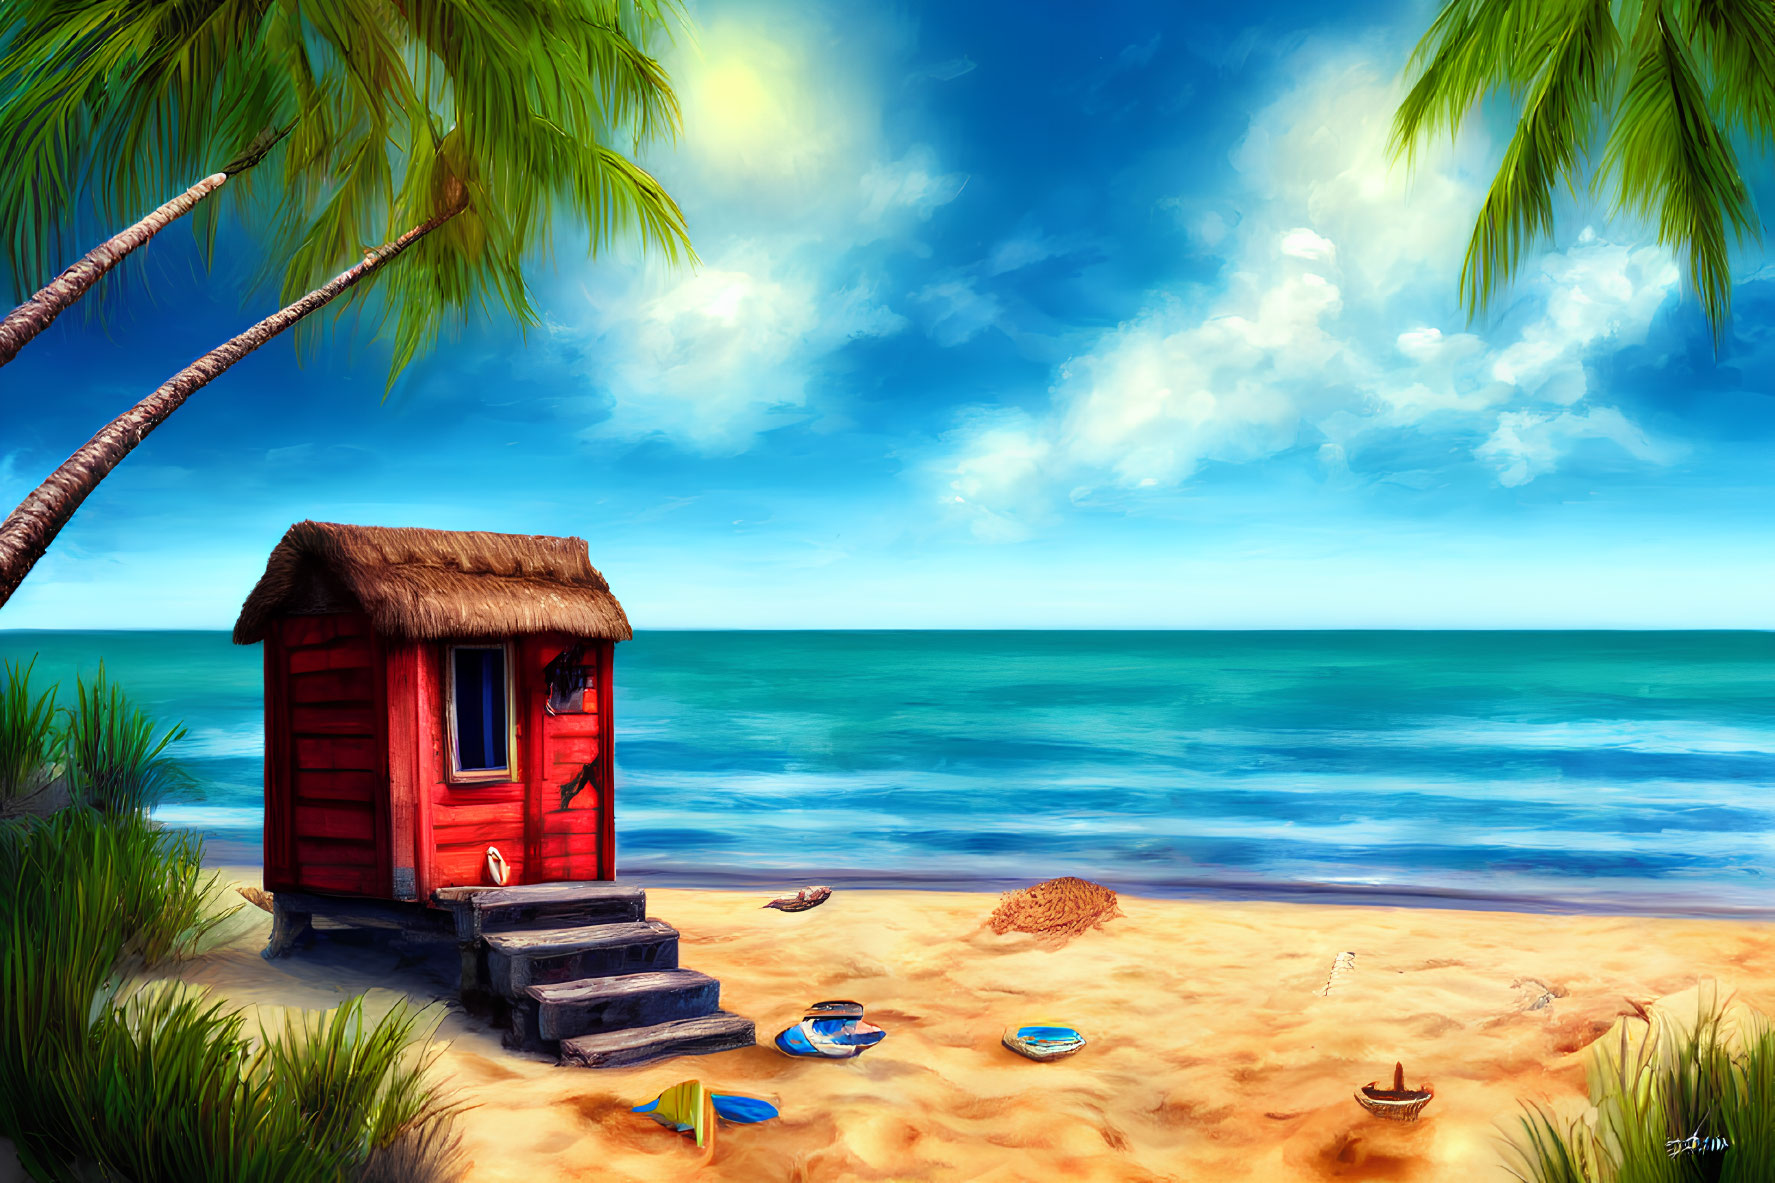 Tranquil beach scene with red hut, palm branches, blue sea, clear sky, and sandals